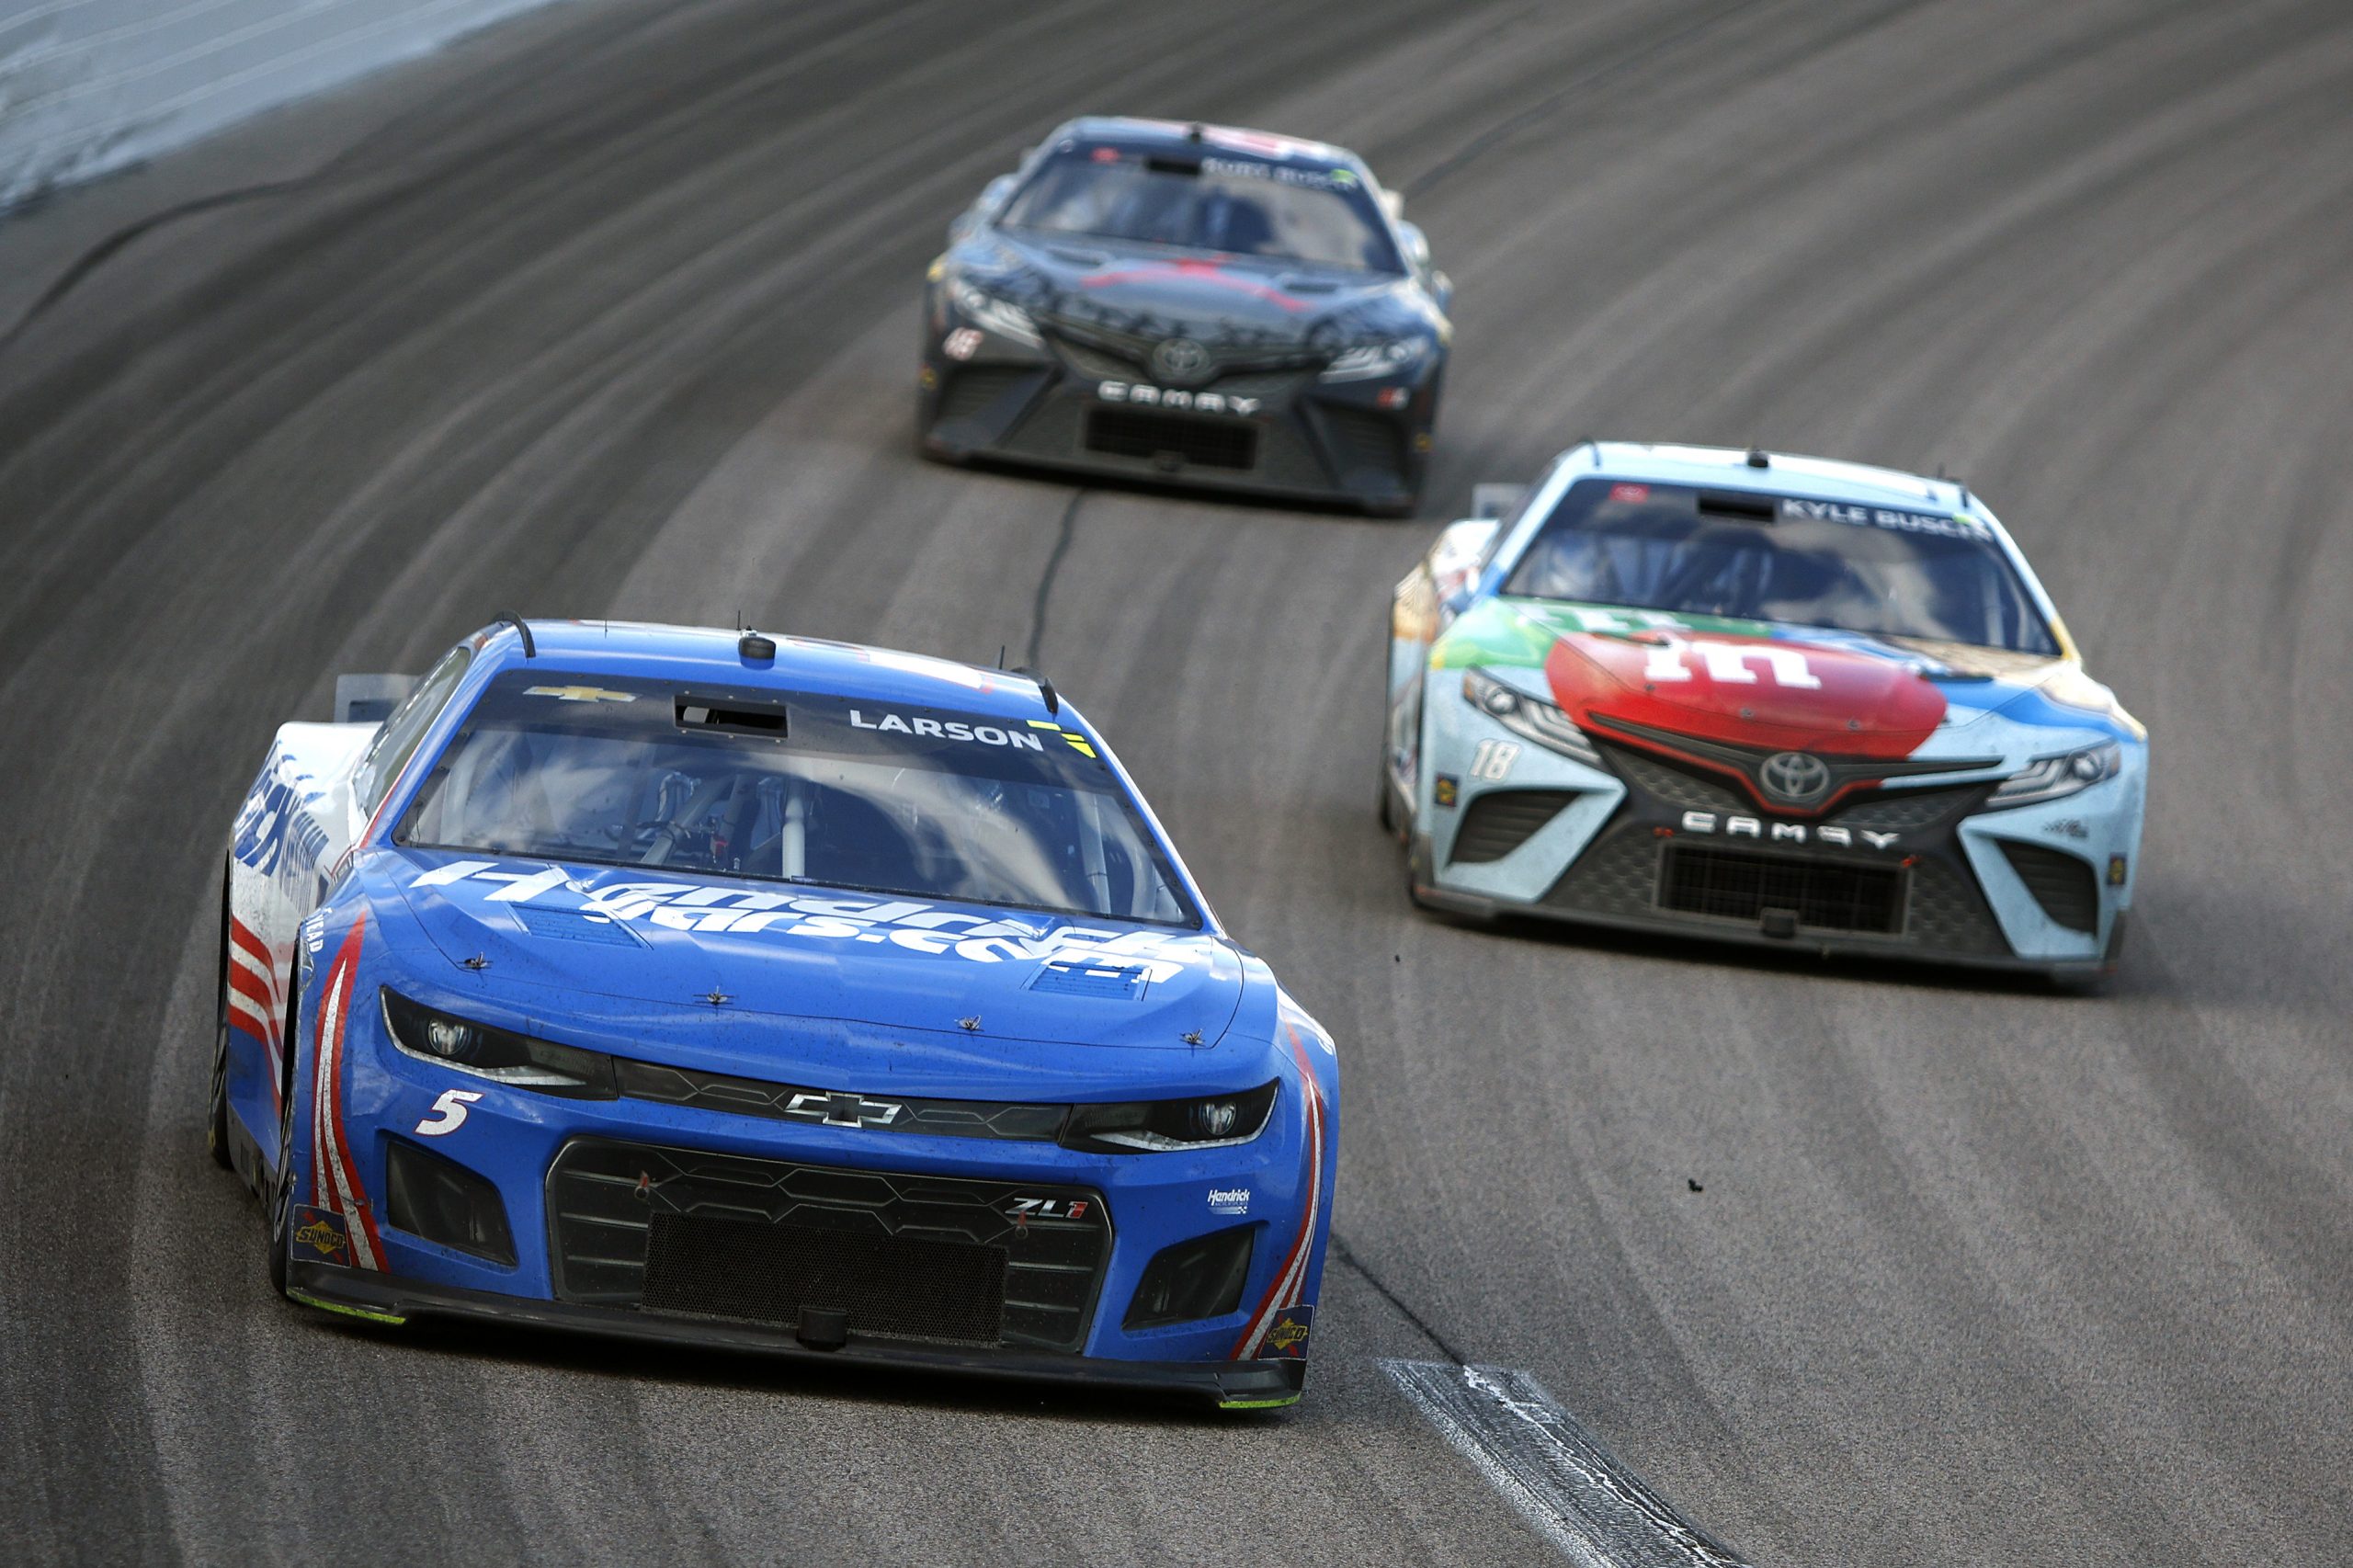 Larson battled with the Busch brothers at Kansas. (Photo: Sean Gardner | Getty Images)